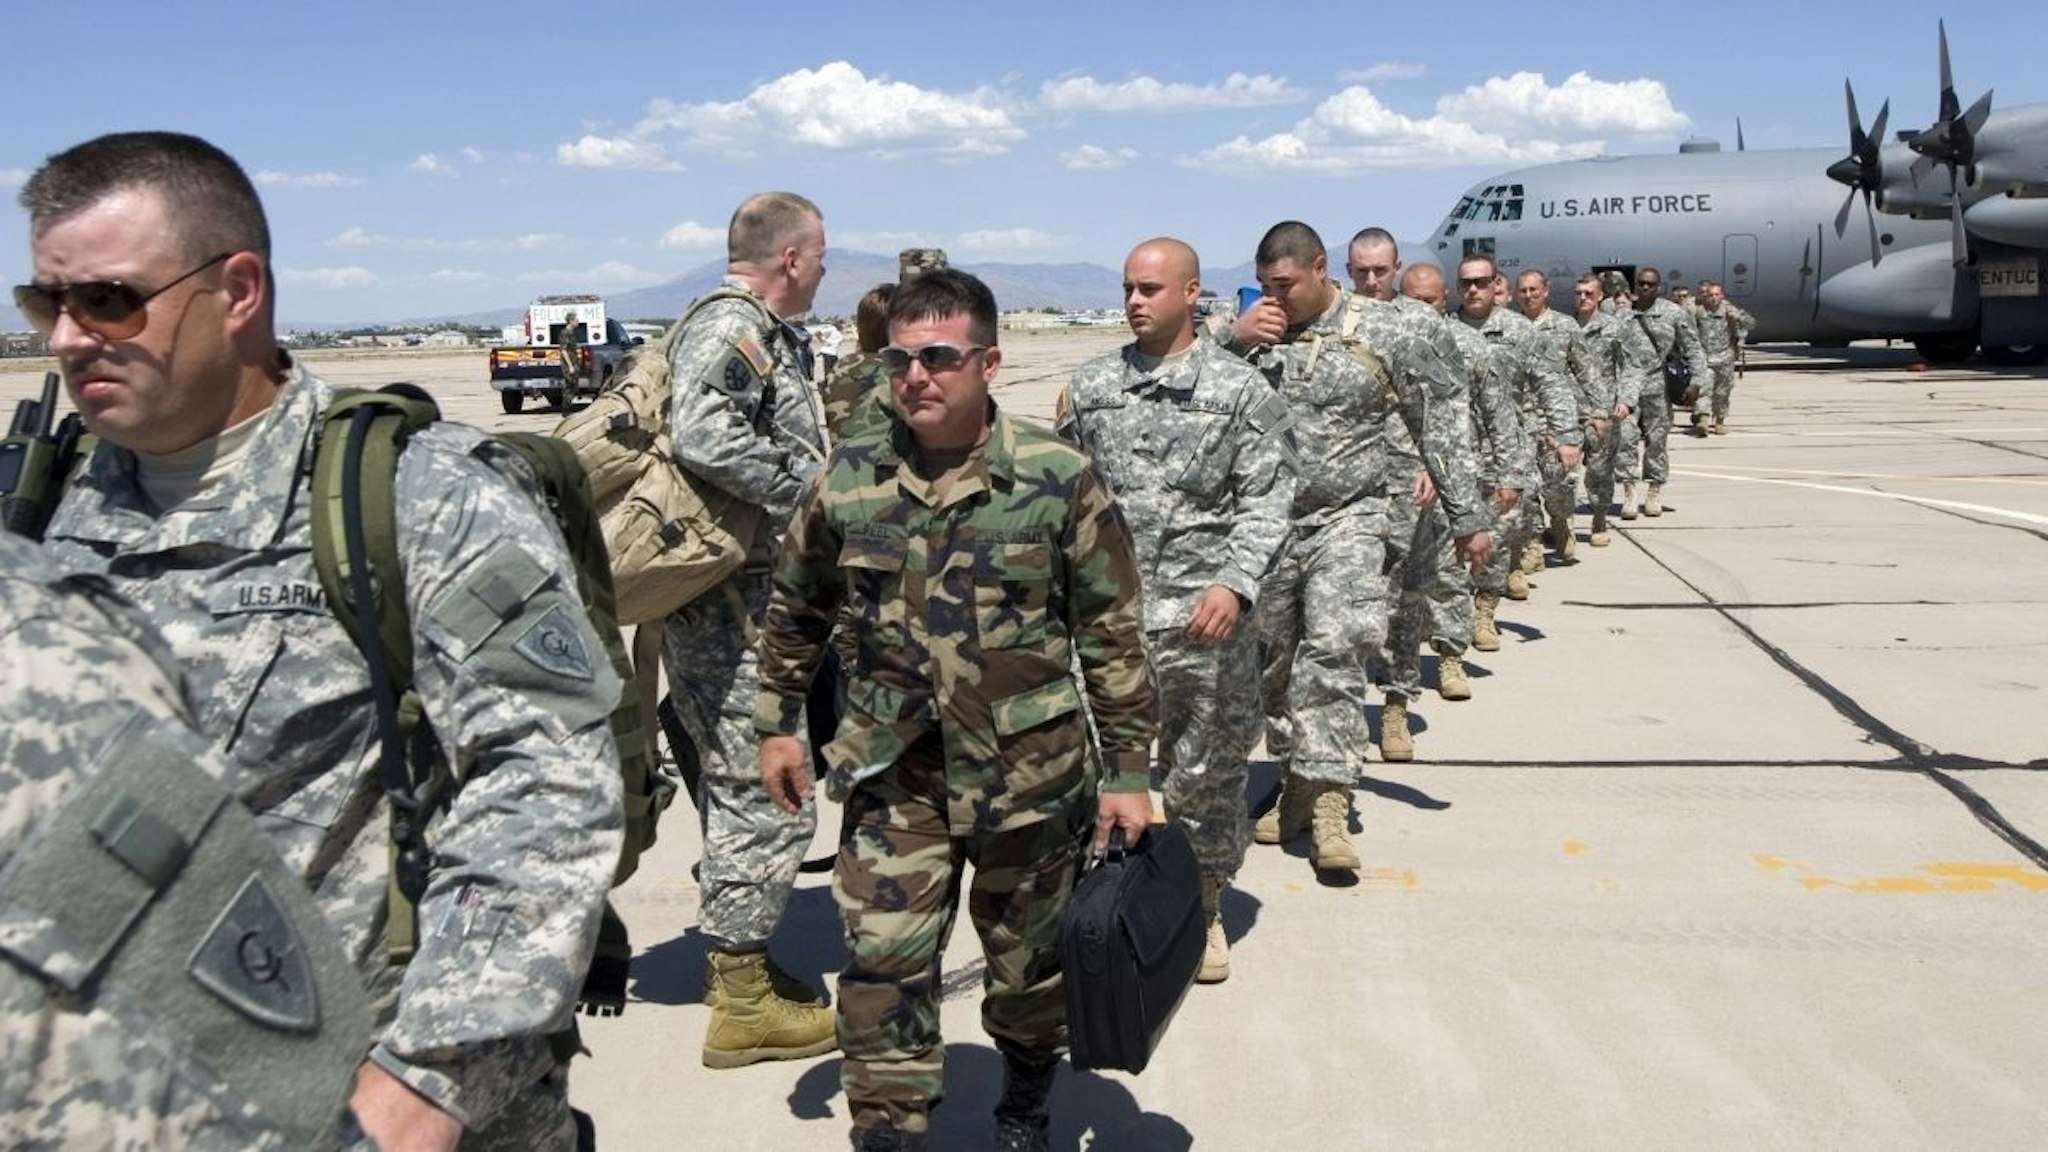 Members of the Kentucky National Guard 206th Engineer battalion arrive on a C-130 Hercules transport plane July 11, 2006 in Tucson, Arizona.